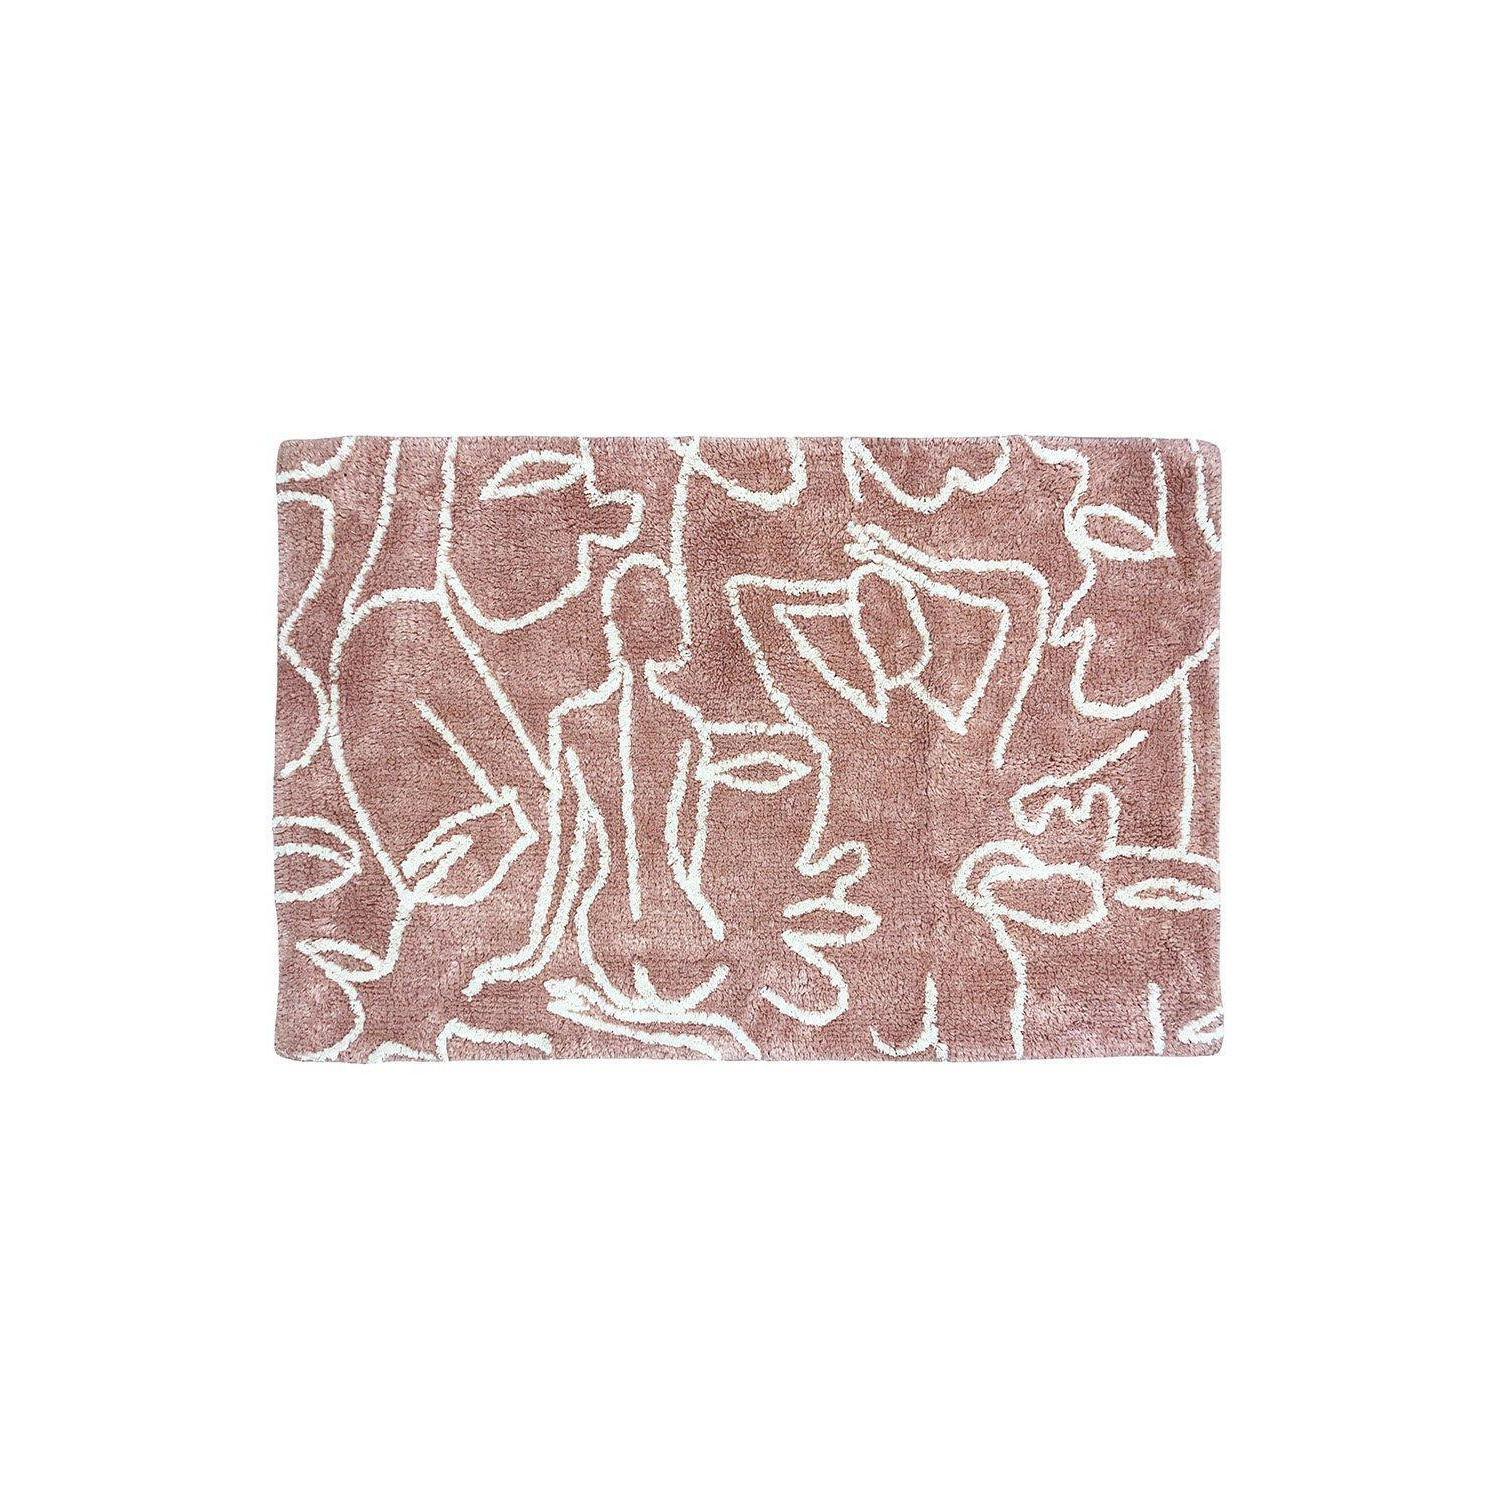 Everybody Abstract Tufted Cotton Anti-Slip Bath Mat - image 1